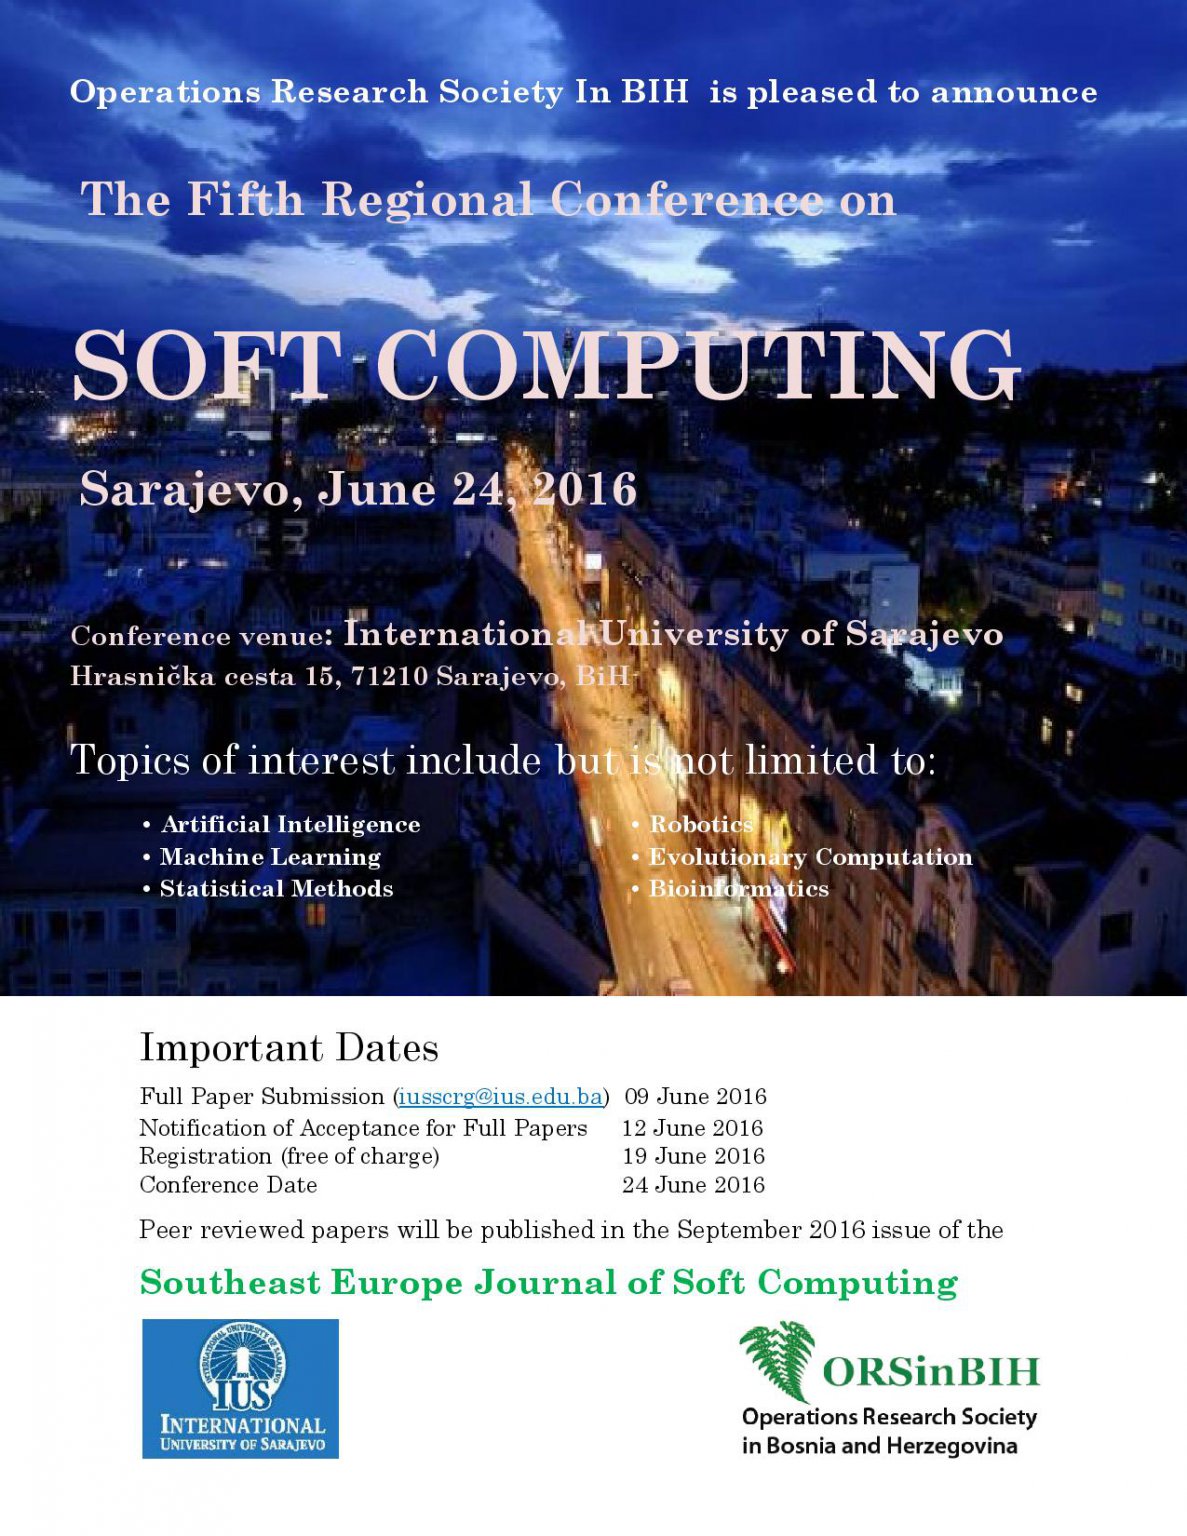  The Fifth Regional Conference on SOFT COMPUTING 